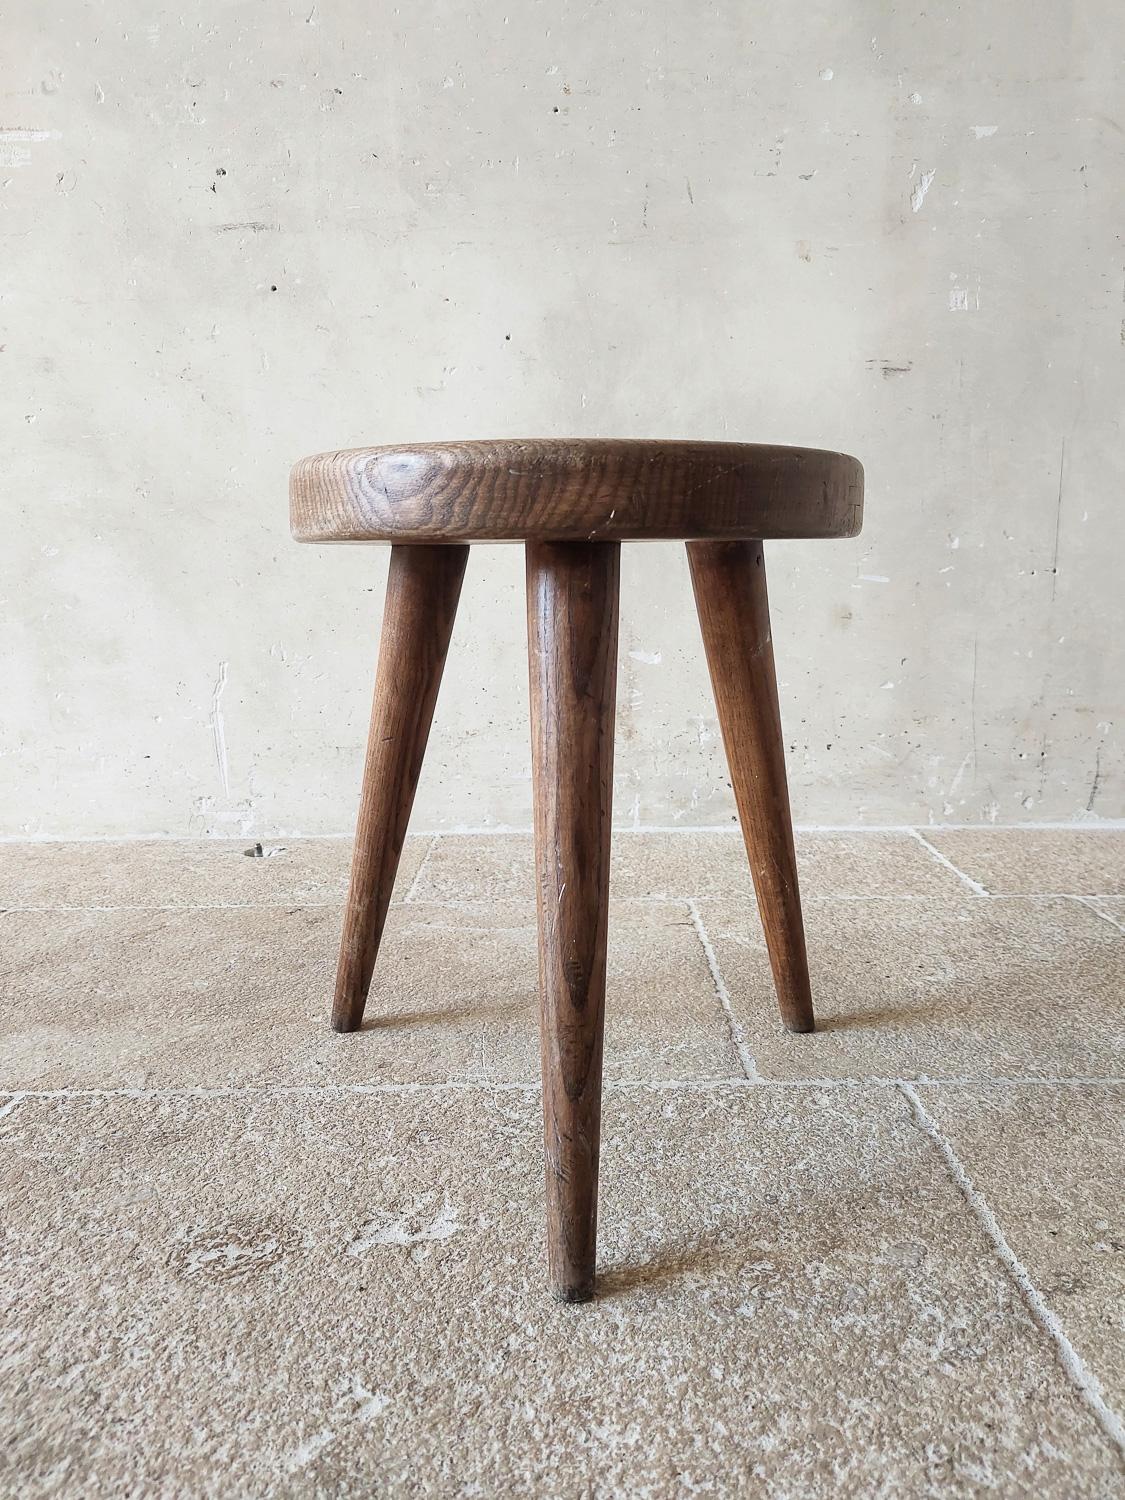 Charlotte Perriand Wooden Berger Stool, circa 1950 In Good Condition For Sale In Baambrugge, NL